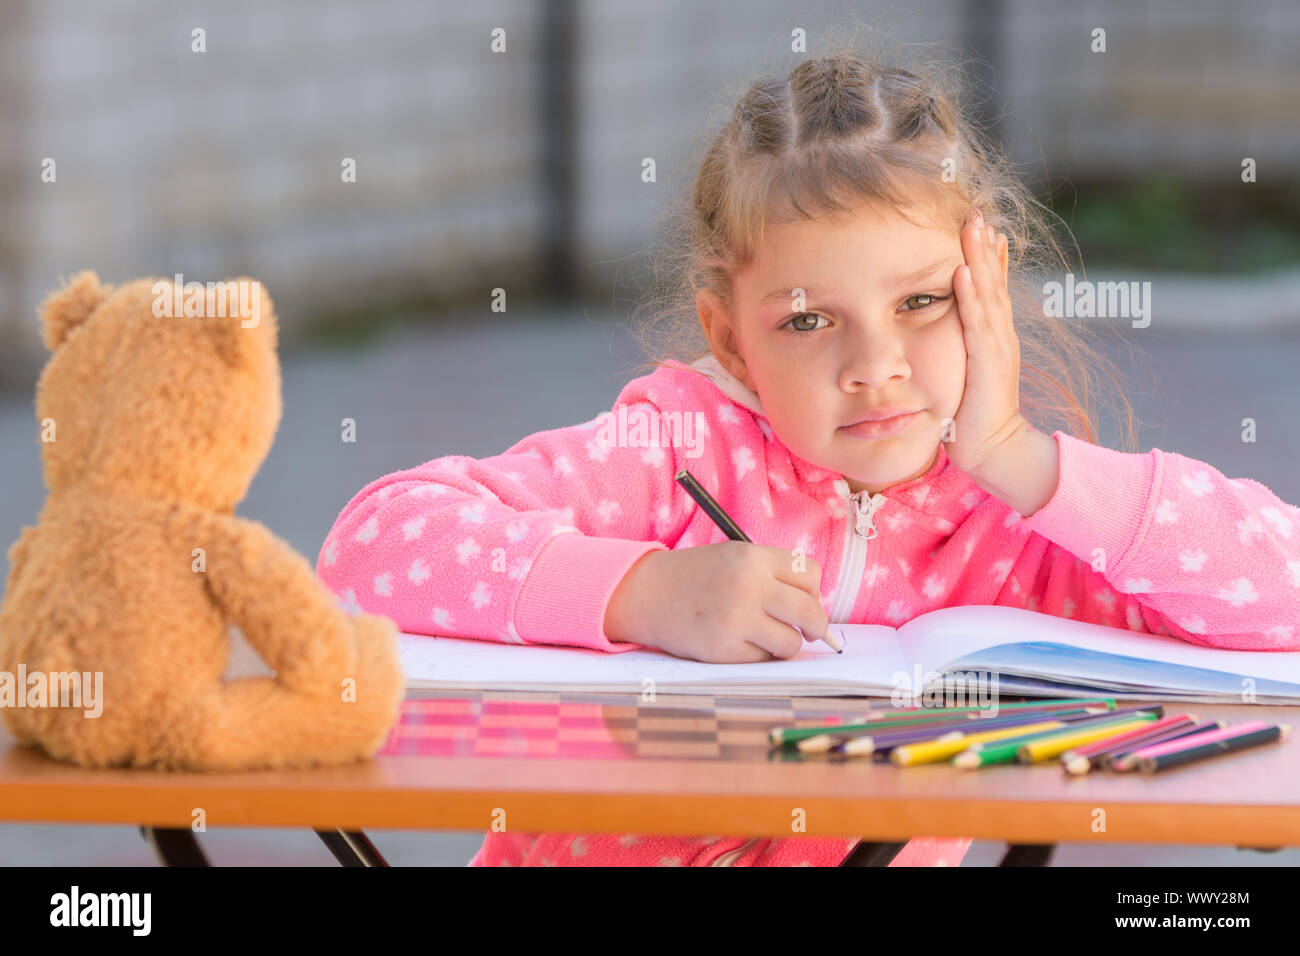 The girl does not know how to continue to draw drawing pencils Stock Photo